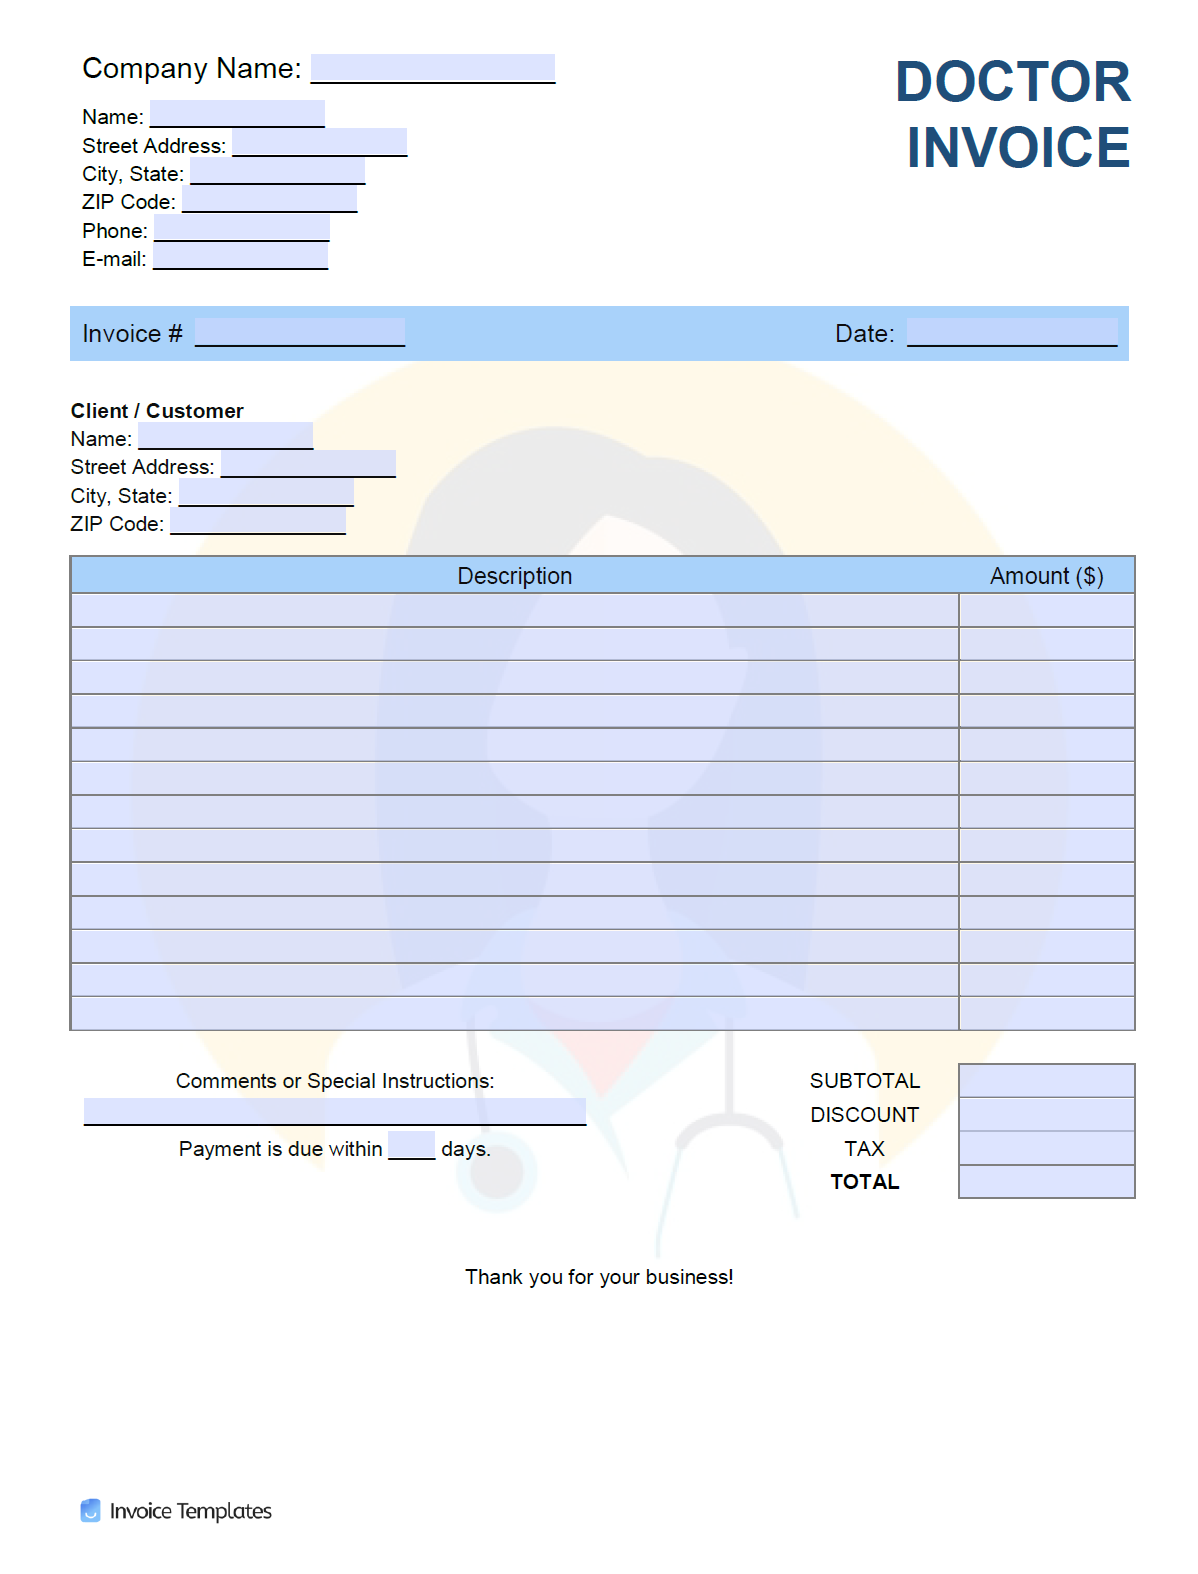 Free Doctor Physician Invoice Template Pdf Word Excel